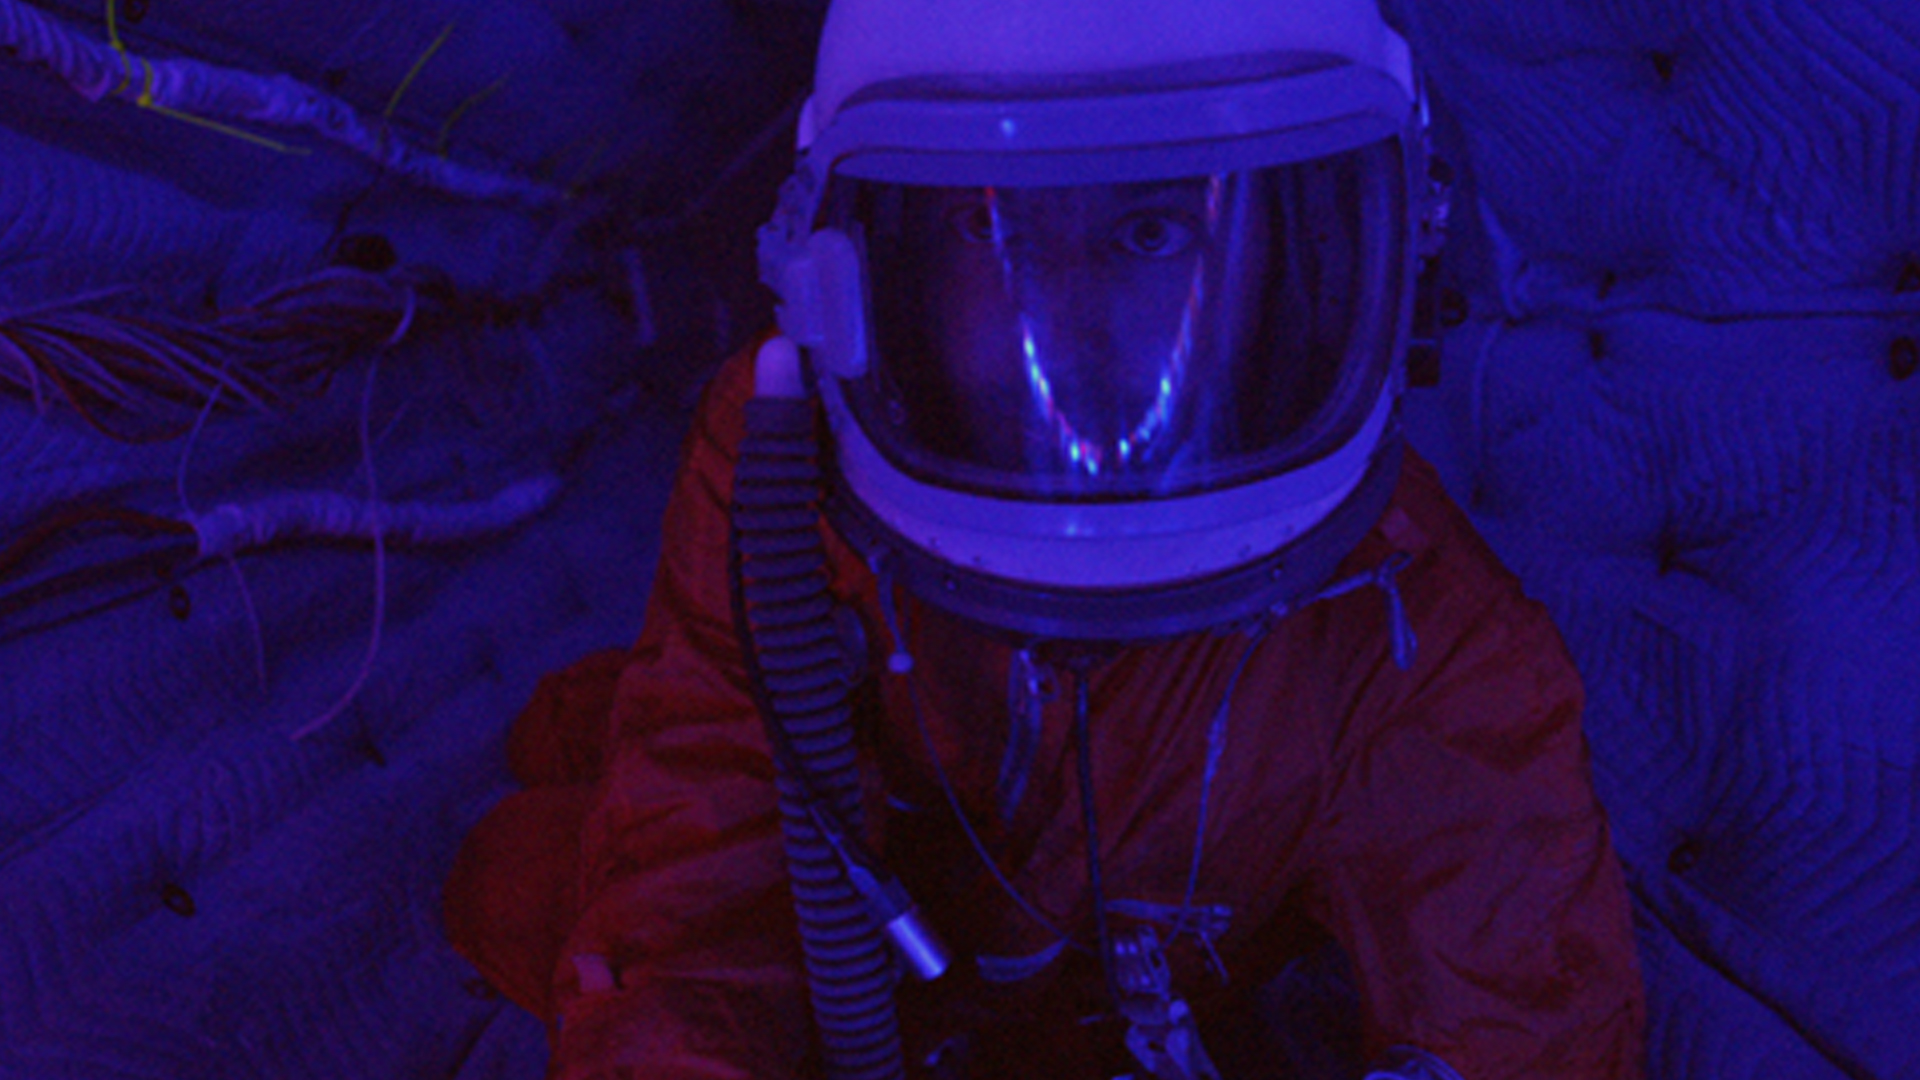 http://www.unificationfrance.com/IMG/jpg/space_time_-_l_ultime_odyss_e_blu-ray_la_critique_03.jpg